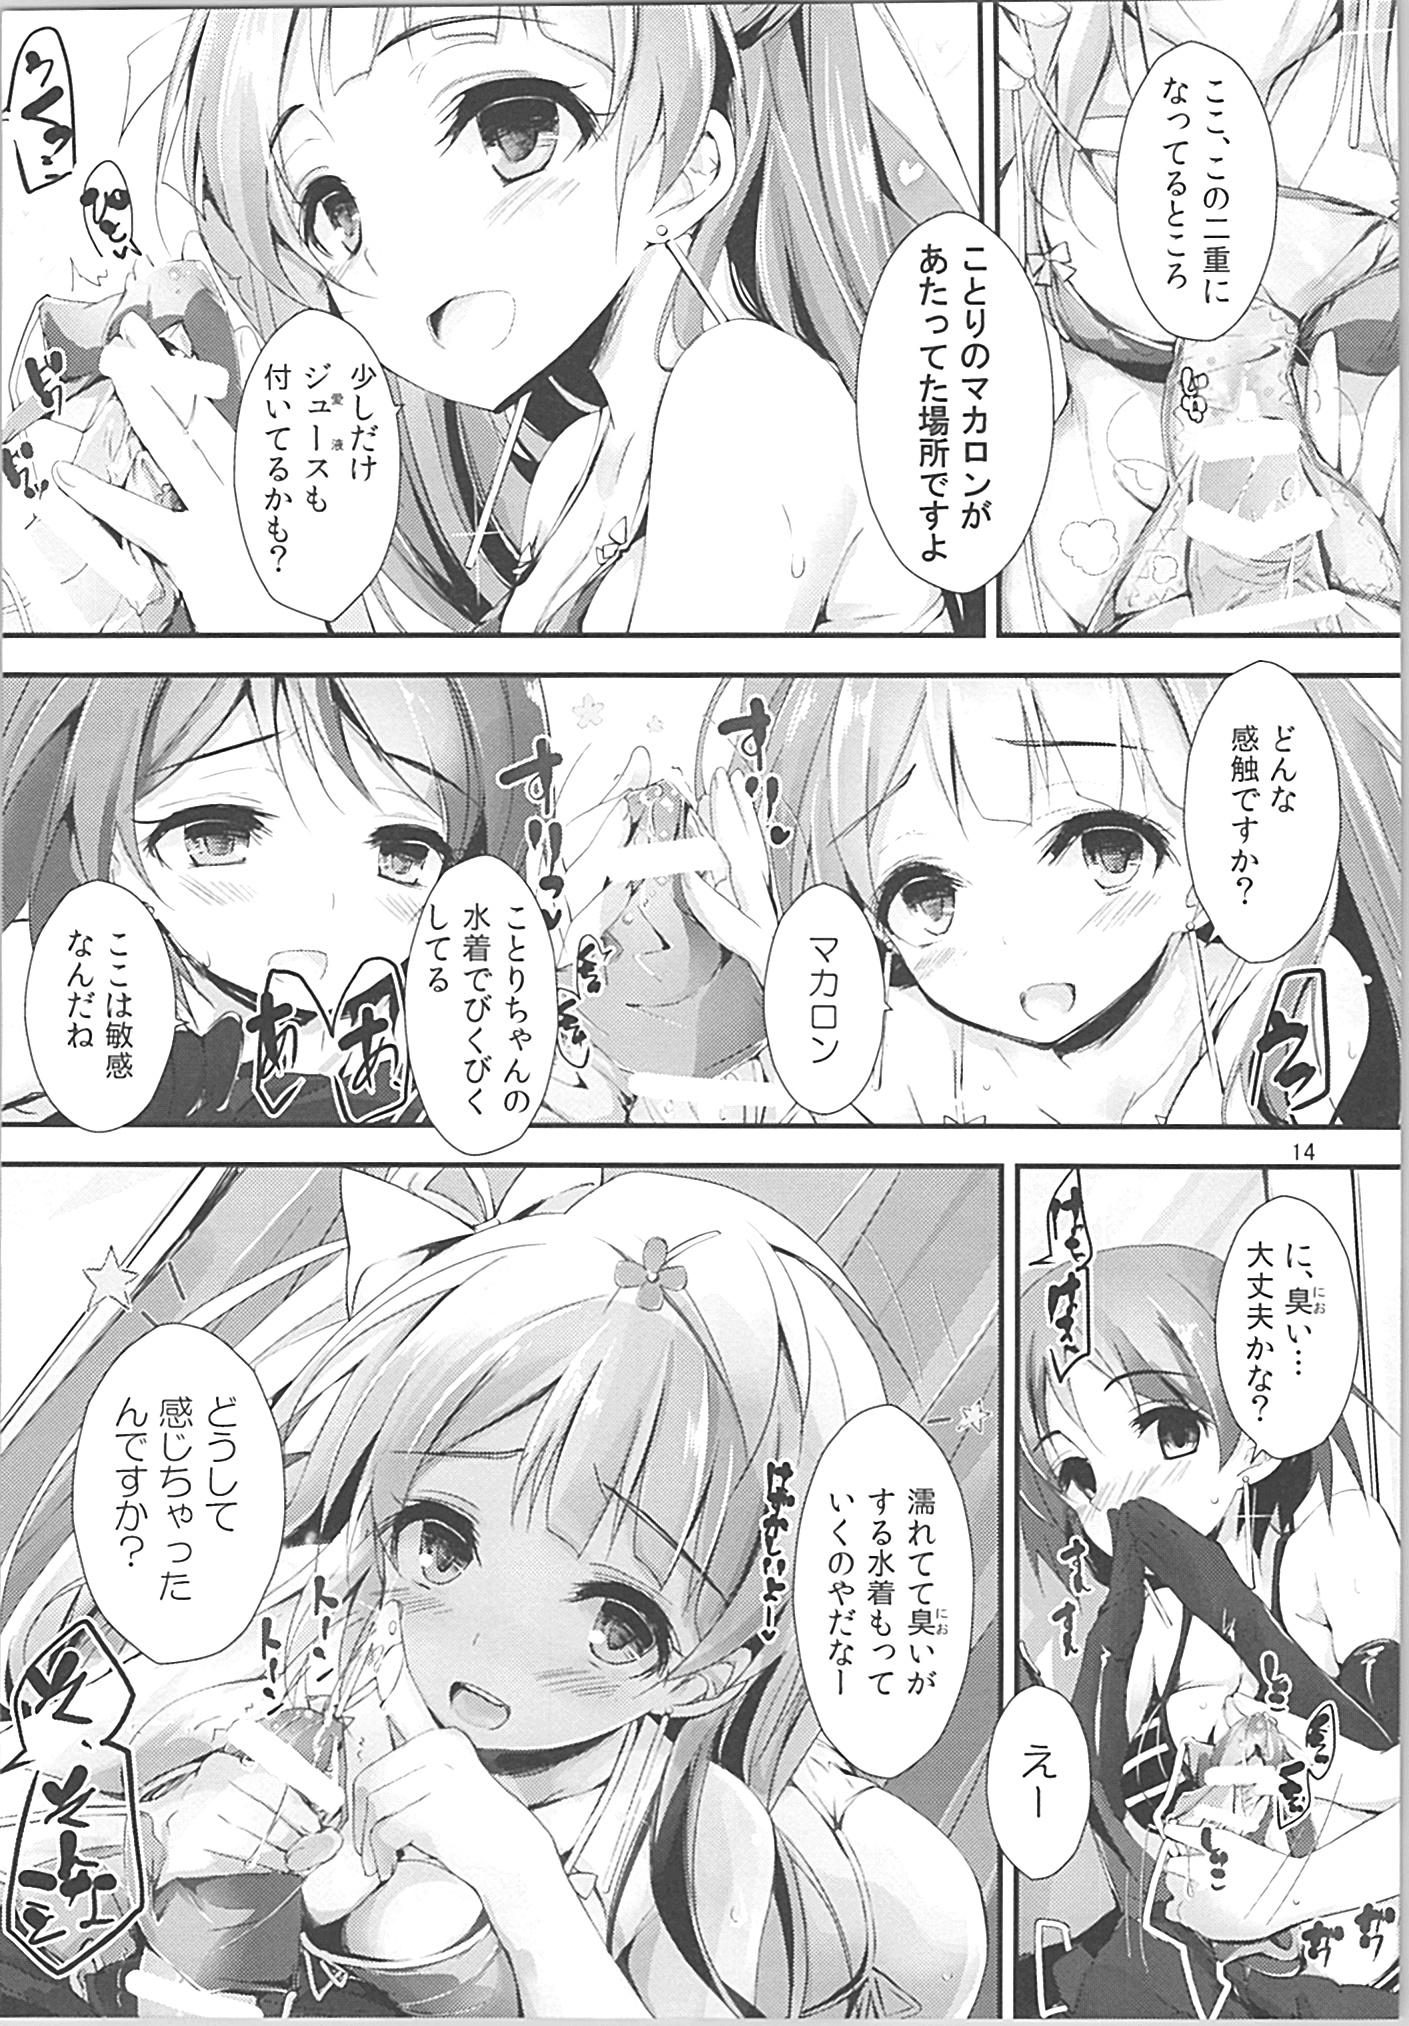 Sexcam Elo Live! collection II - Love live Prostitute - Page 13